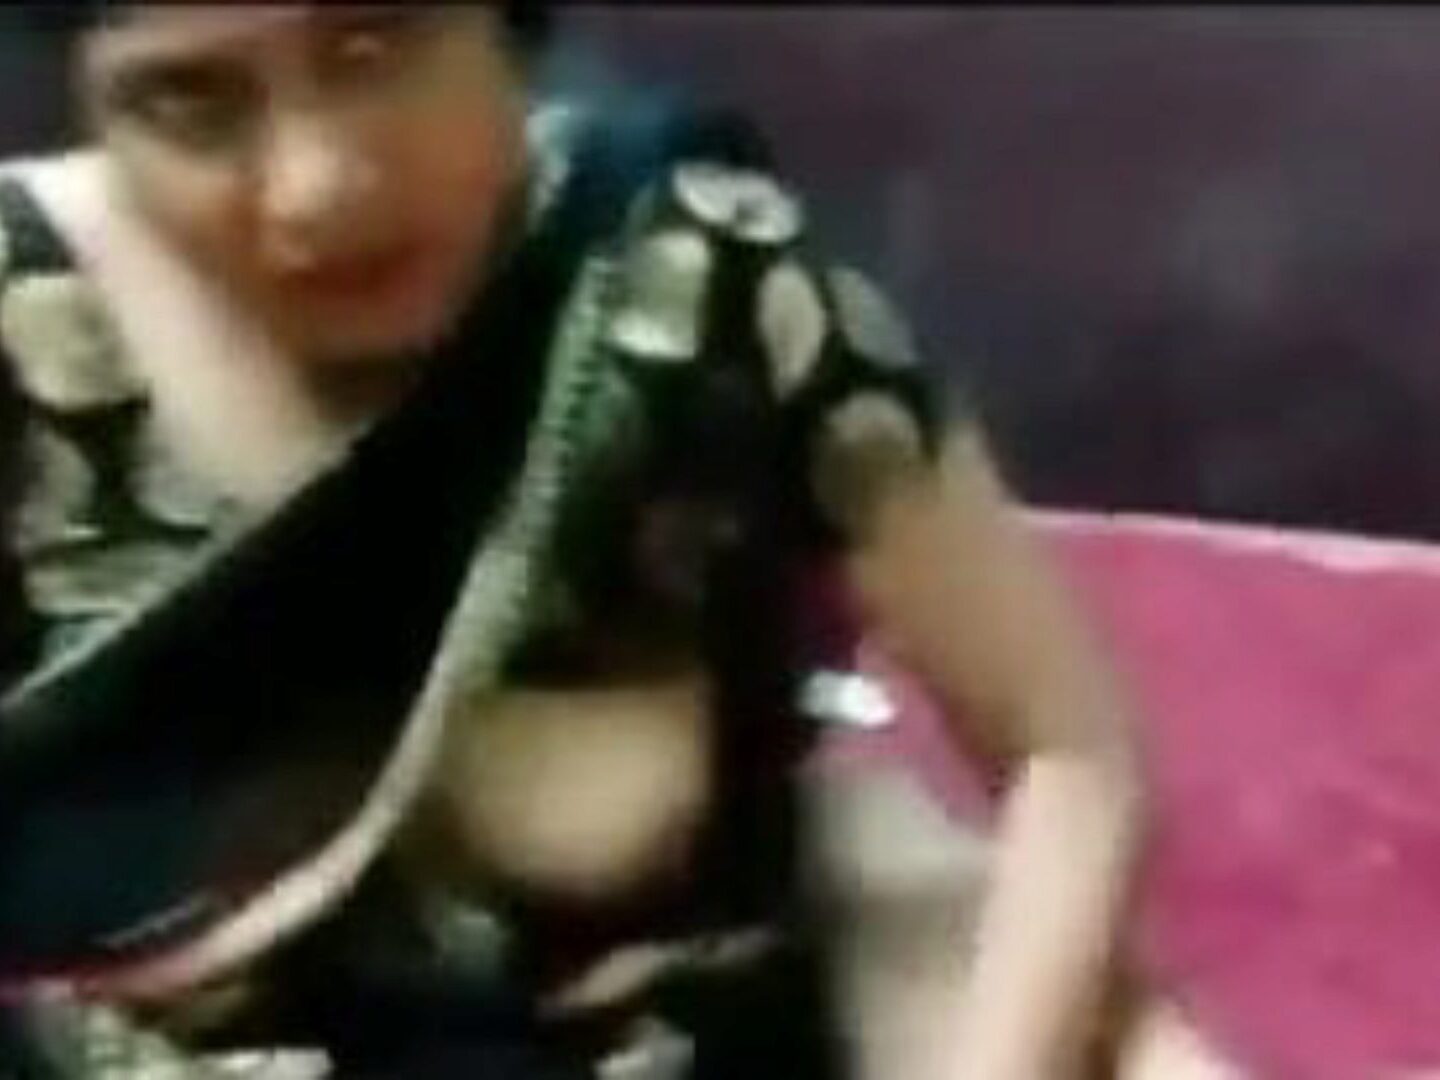 Sex Videos Nice Xd - Indian Cute Girl With Forenyear Porn Sex Video - Nude Clap